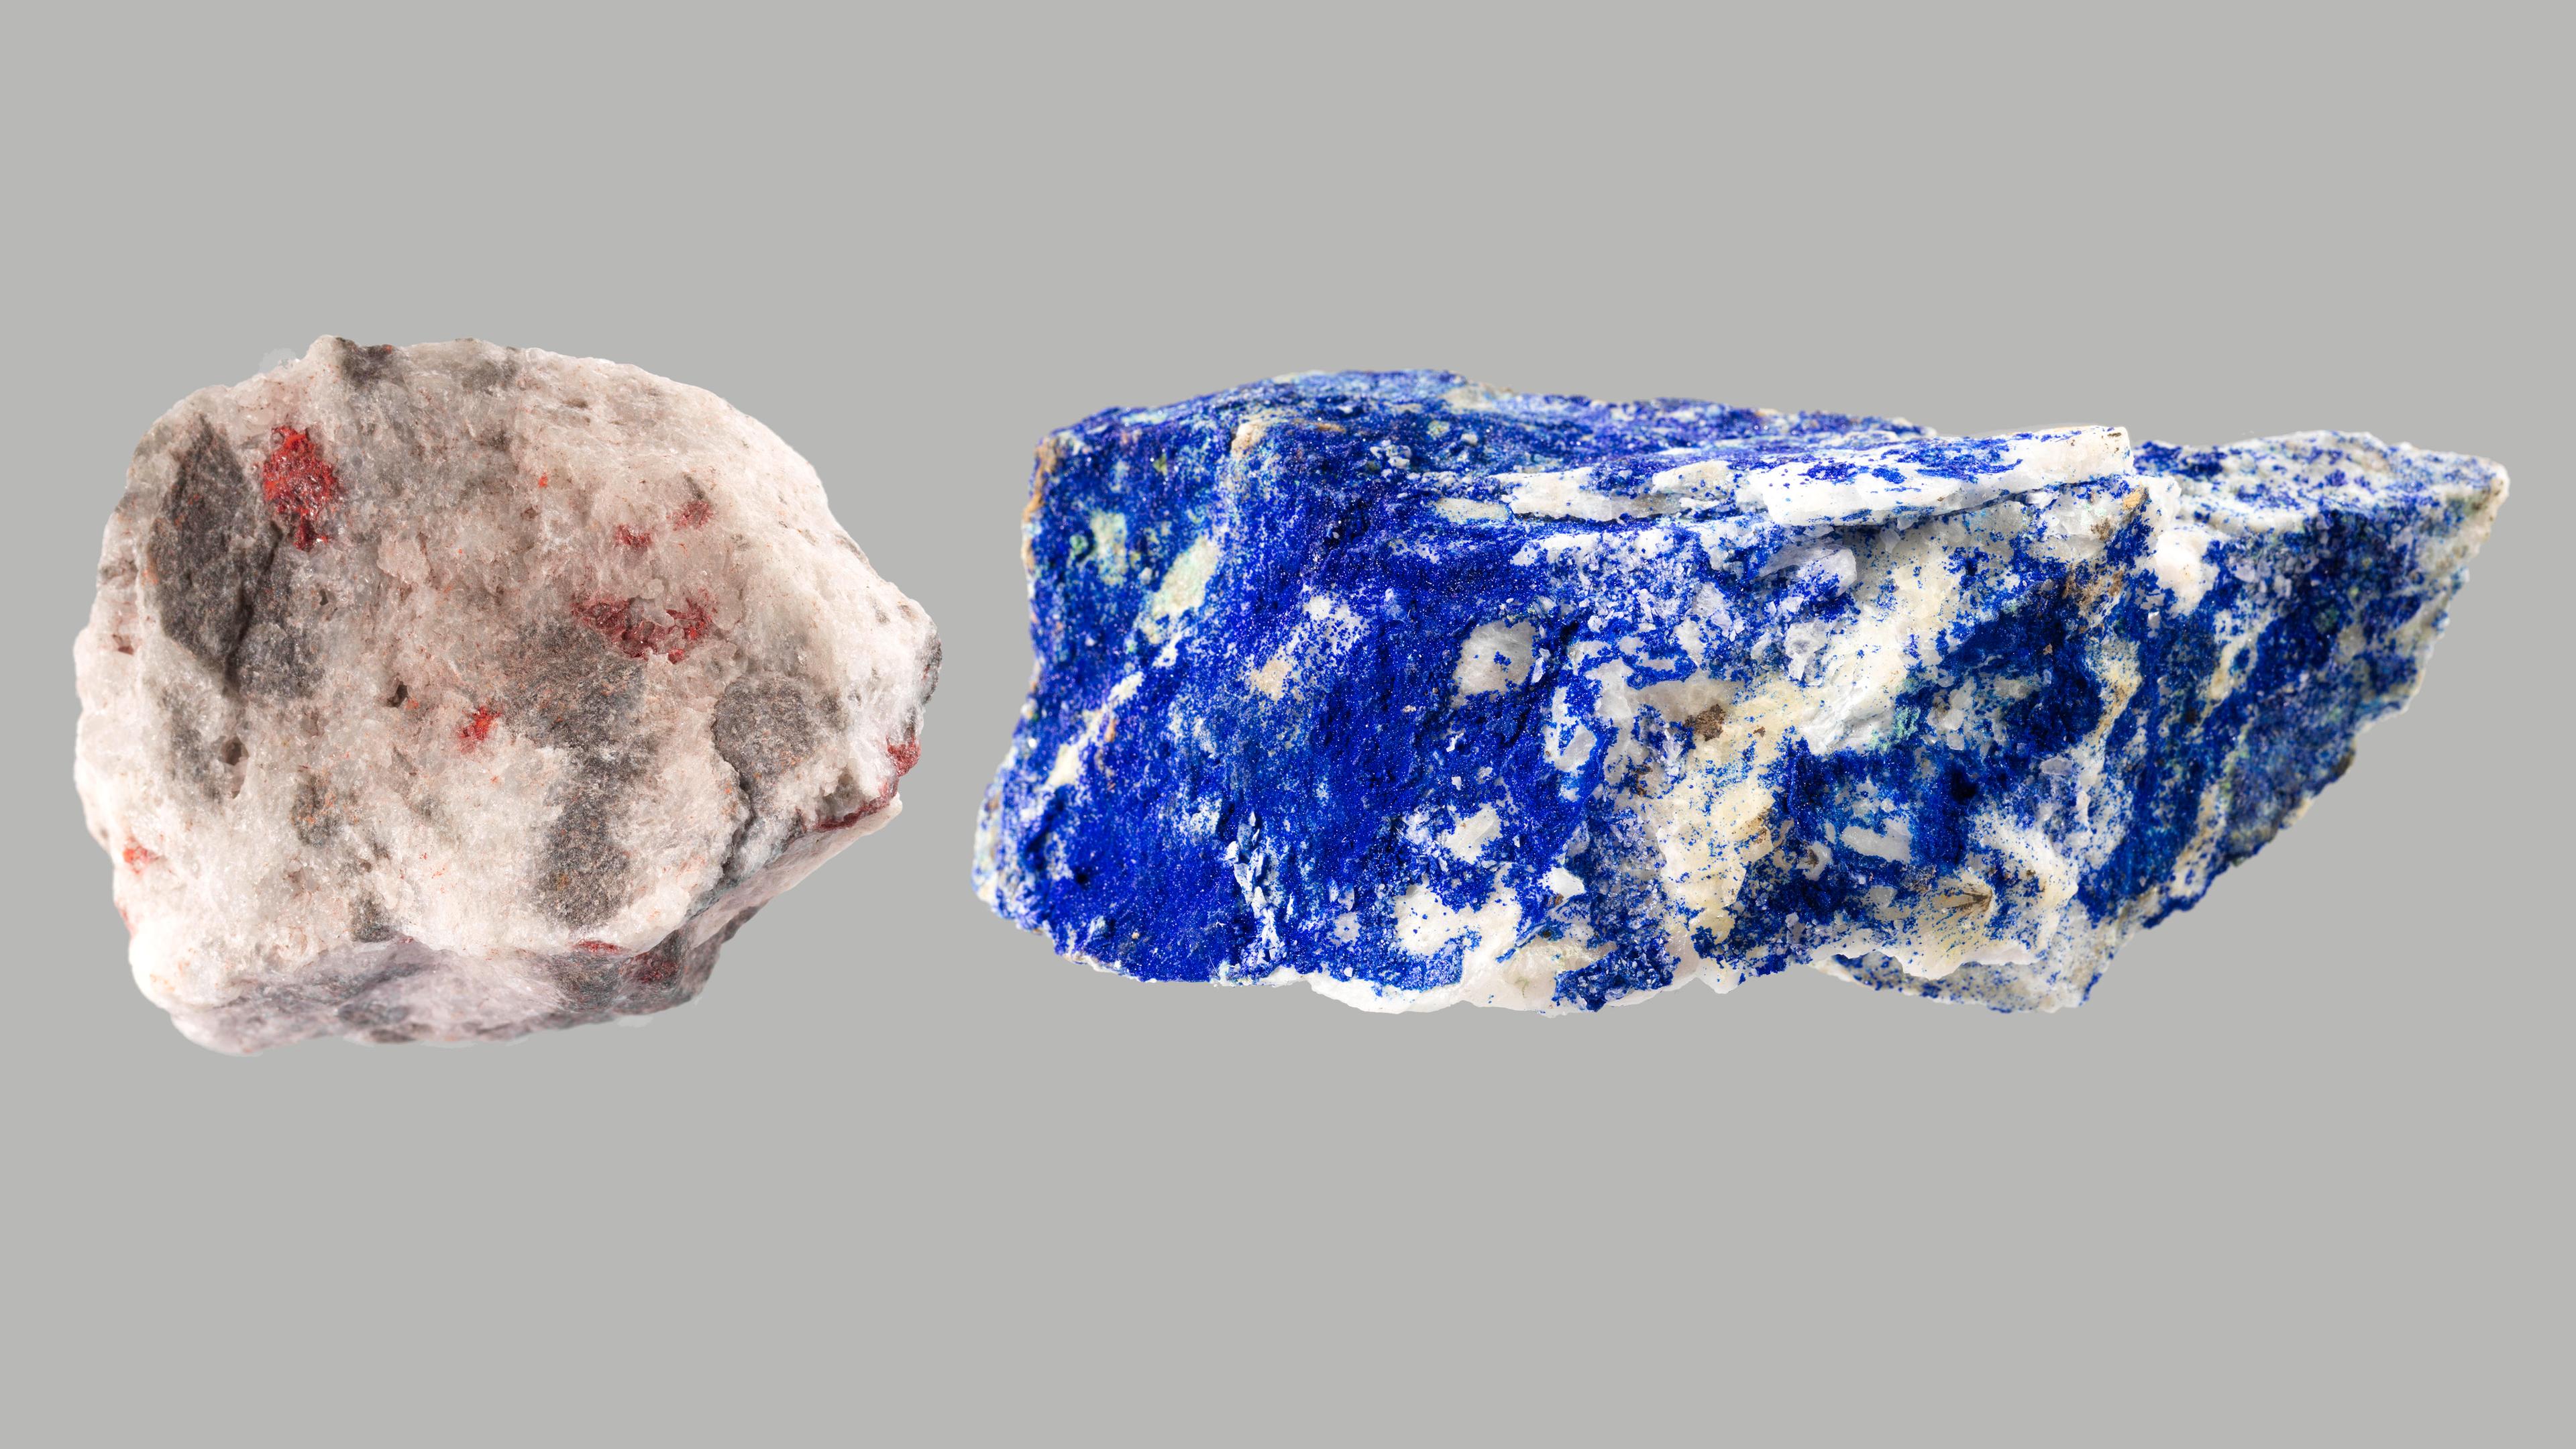 Samples of cinnabar and azurite